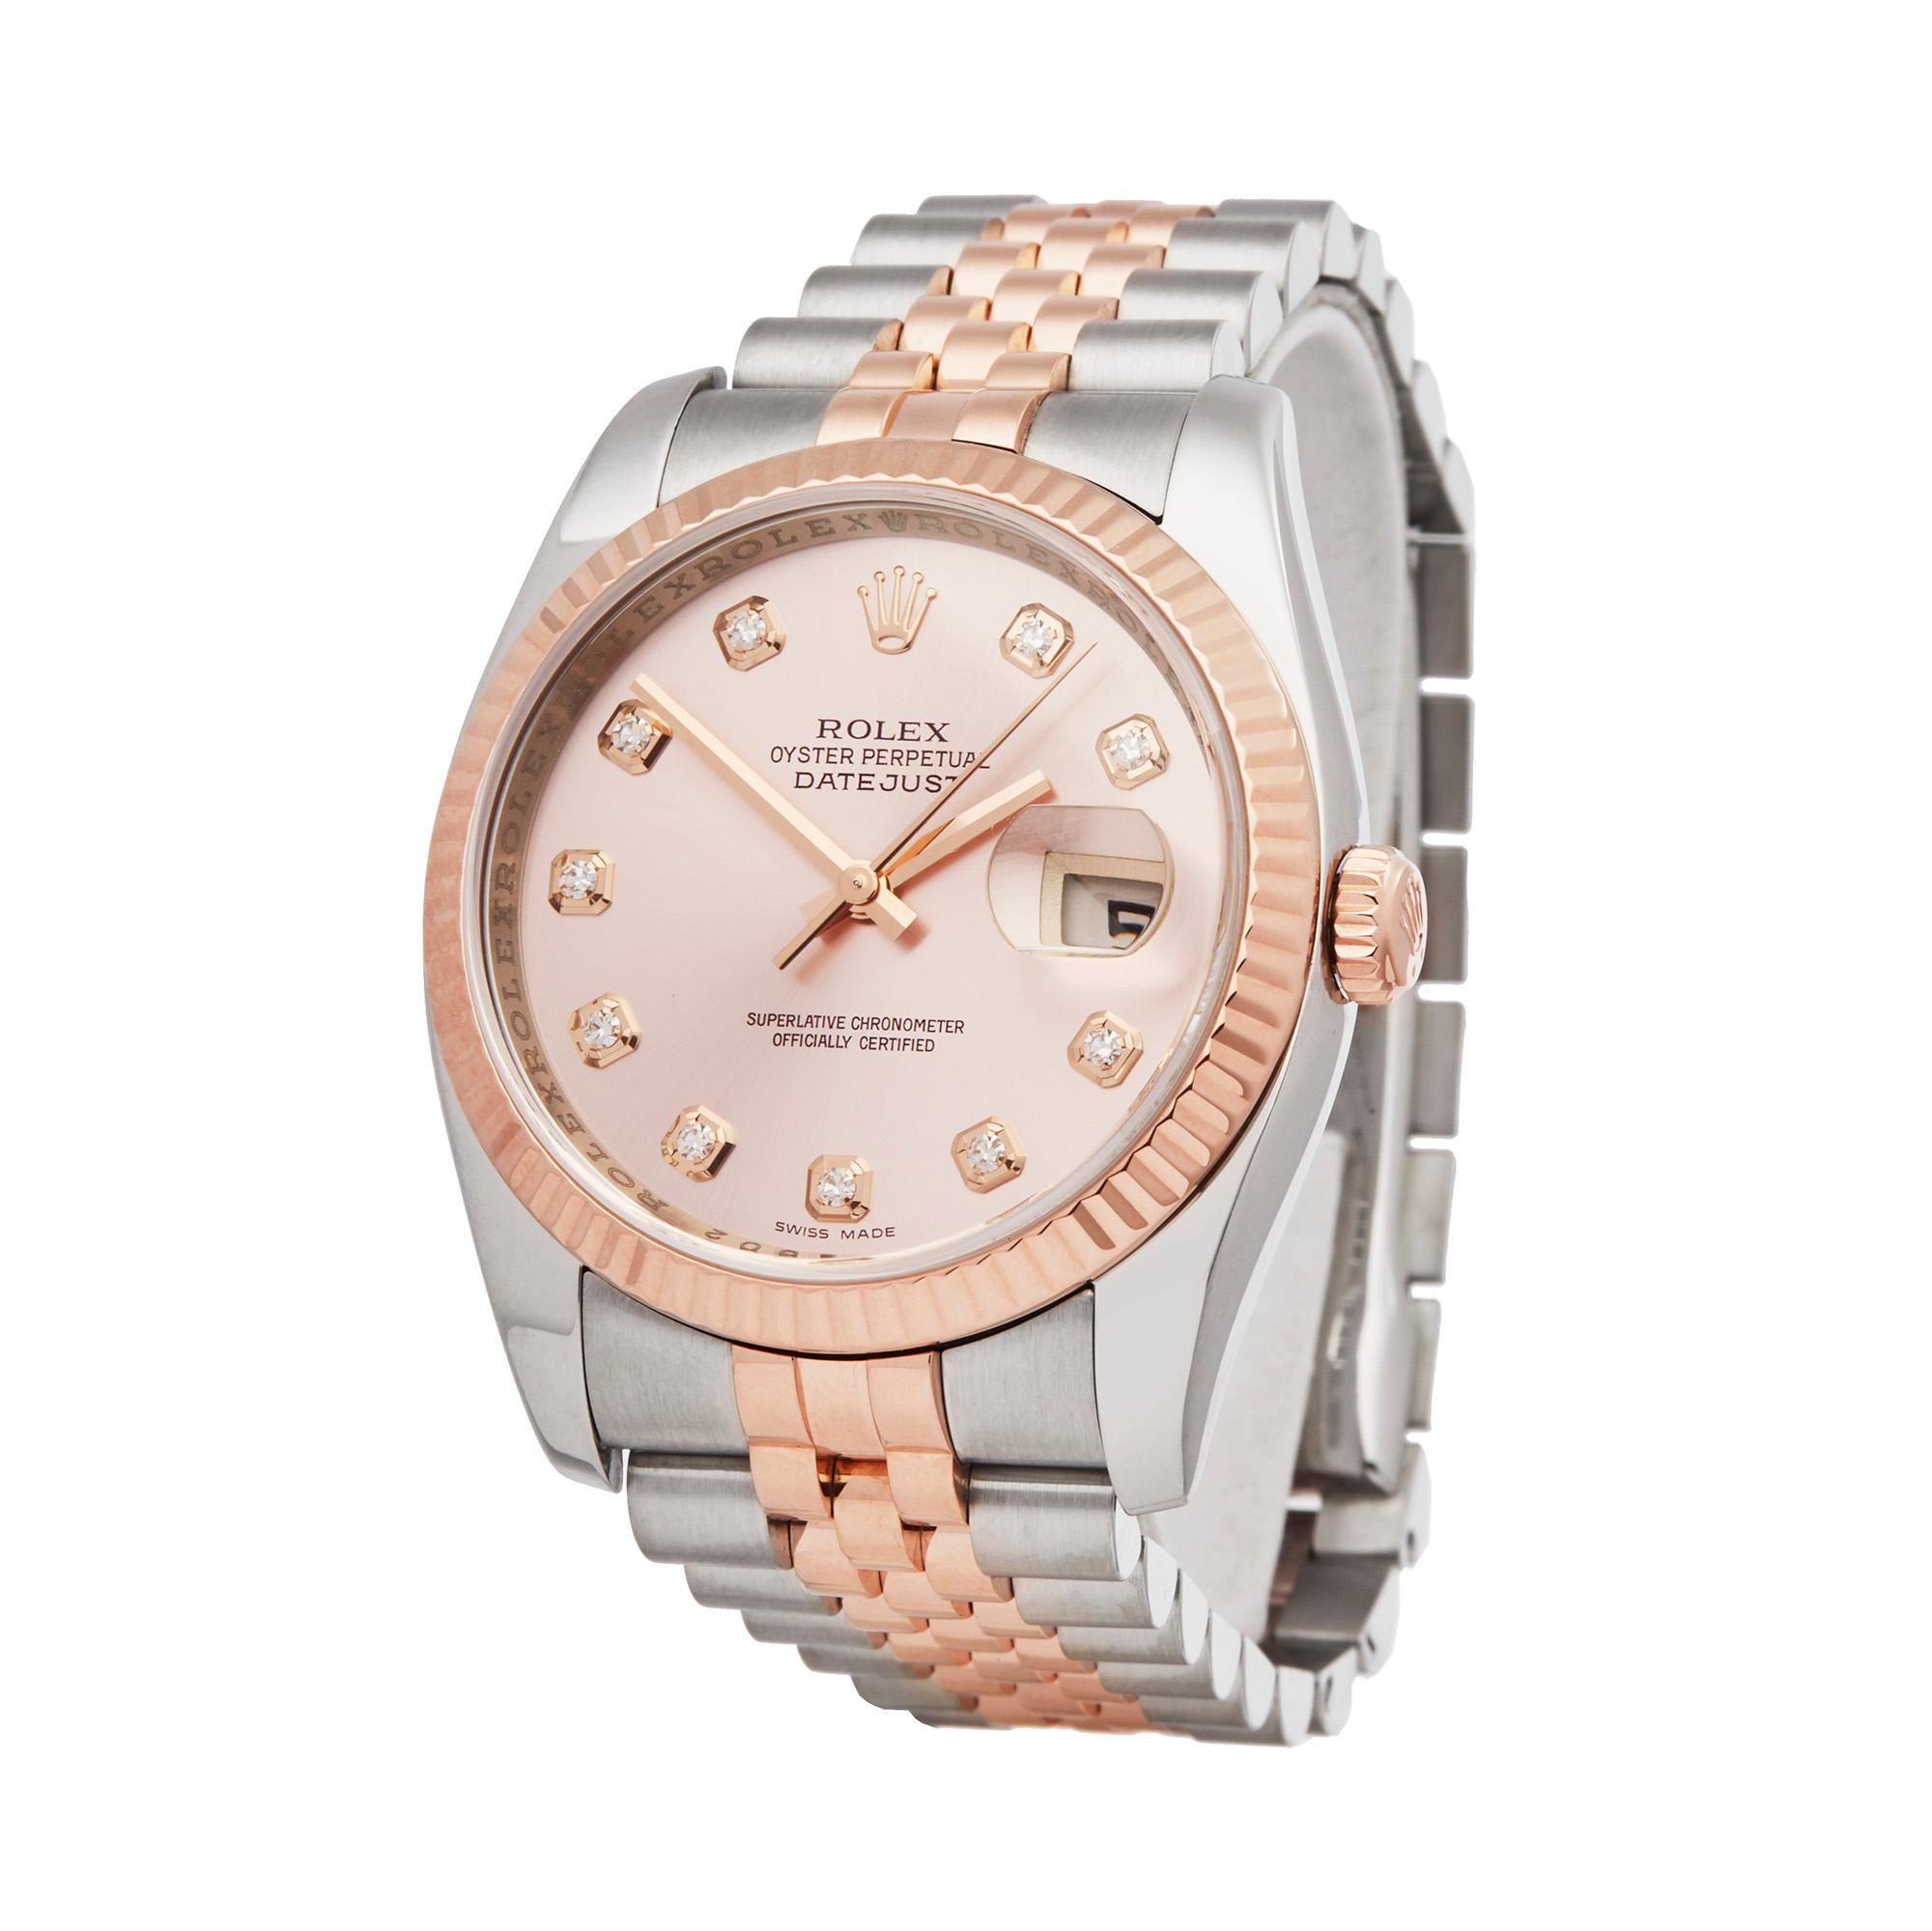 Reference: W5722
Manufacturer: Rolex
Model: Datejust
Model Reference: 116231
Age: 3rd October 2011
Gender: Unisex
Box and Papers: Box and Guarantee
Dial: Pink and Diamonds
Glass: Sapphire Crystal
Movement: Automatic
Water Resistance: To